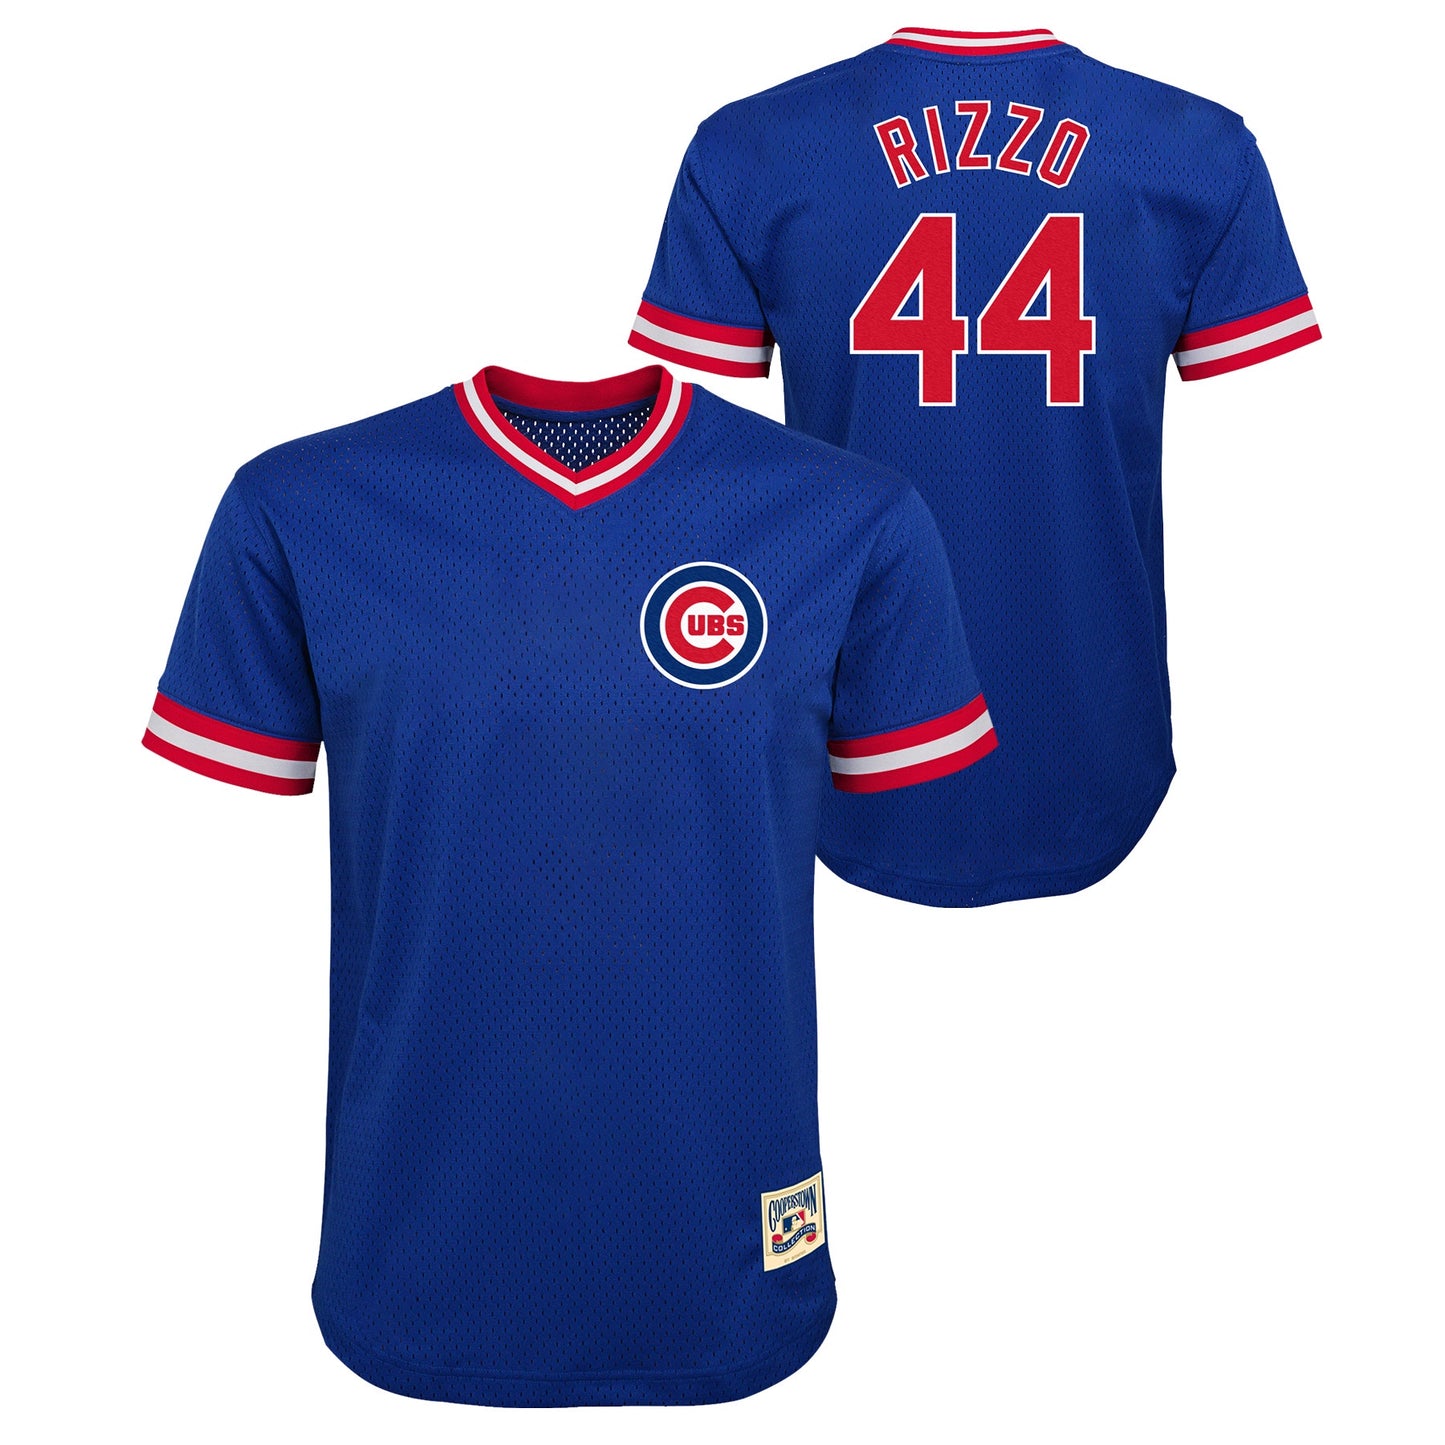 Youth Anthony Rizzo Chicago Cubs Cooperstown Cooperstown Collection Blue V-Neck Mesh Jersey